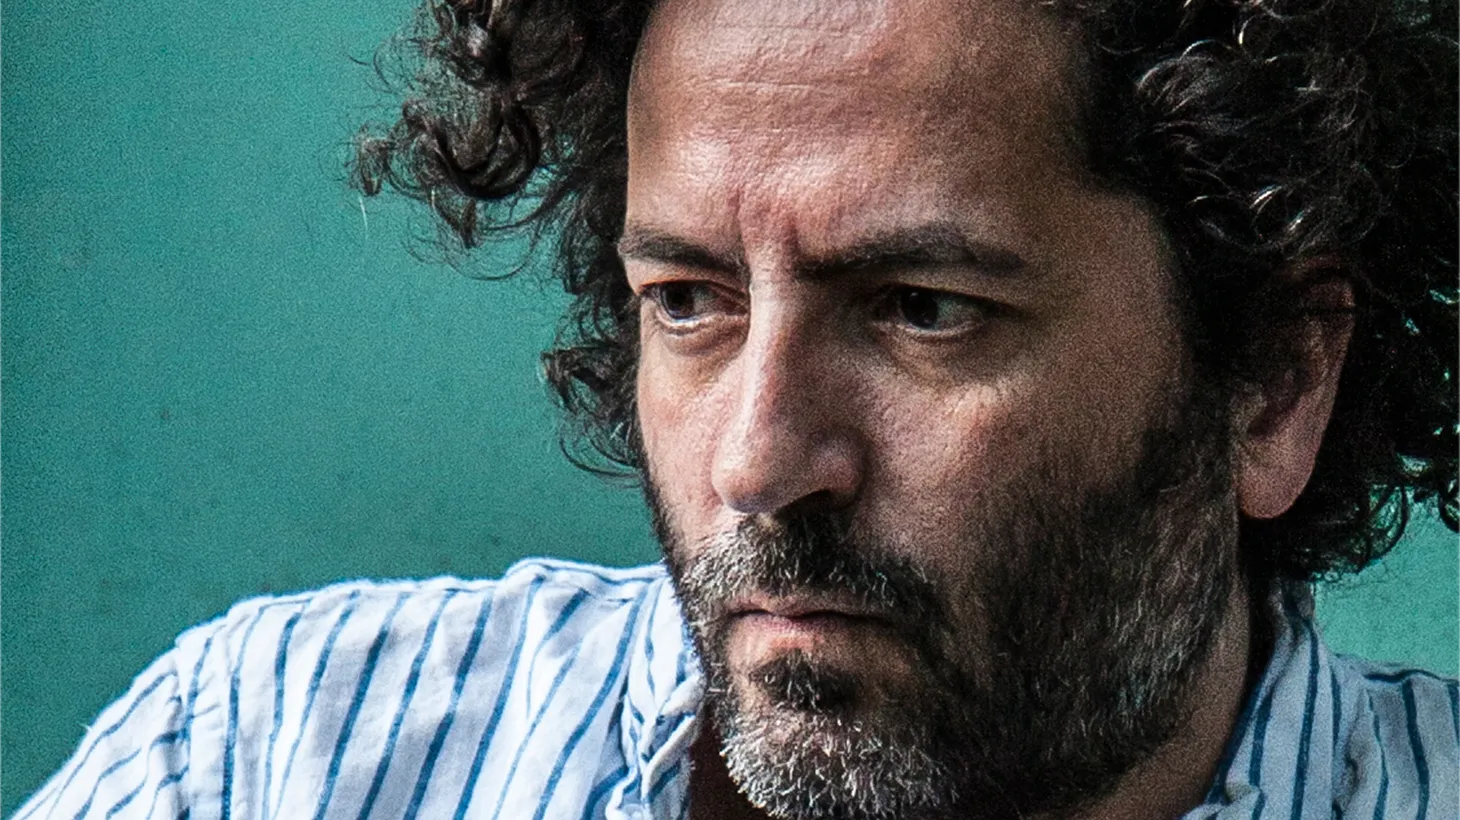 Destroyer is the long-running solo project from The New Pornographer’s Dan Bejar. Destroyer’s 12th album ken showcases the evocative songwriting he is known for and we’re excited to welcome the band for a live set.